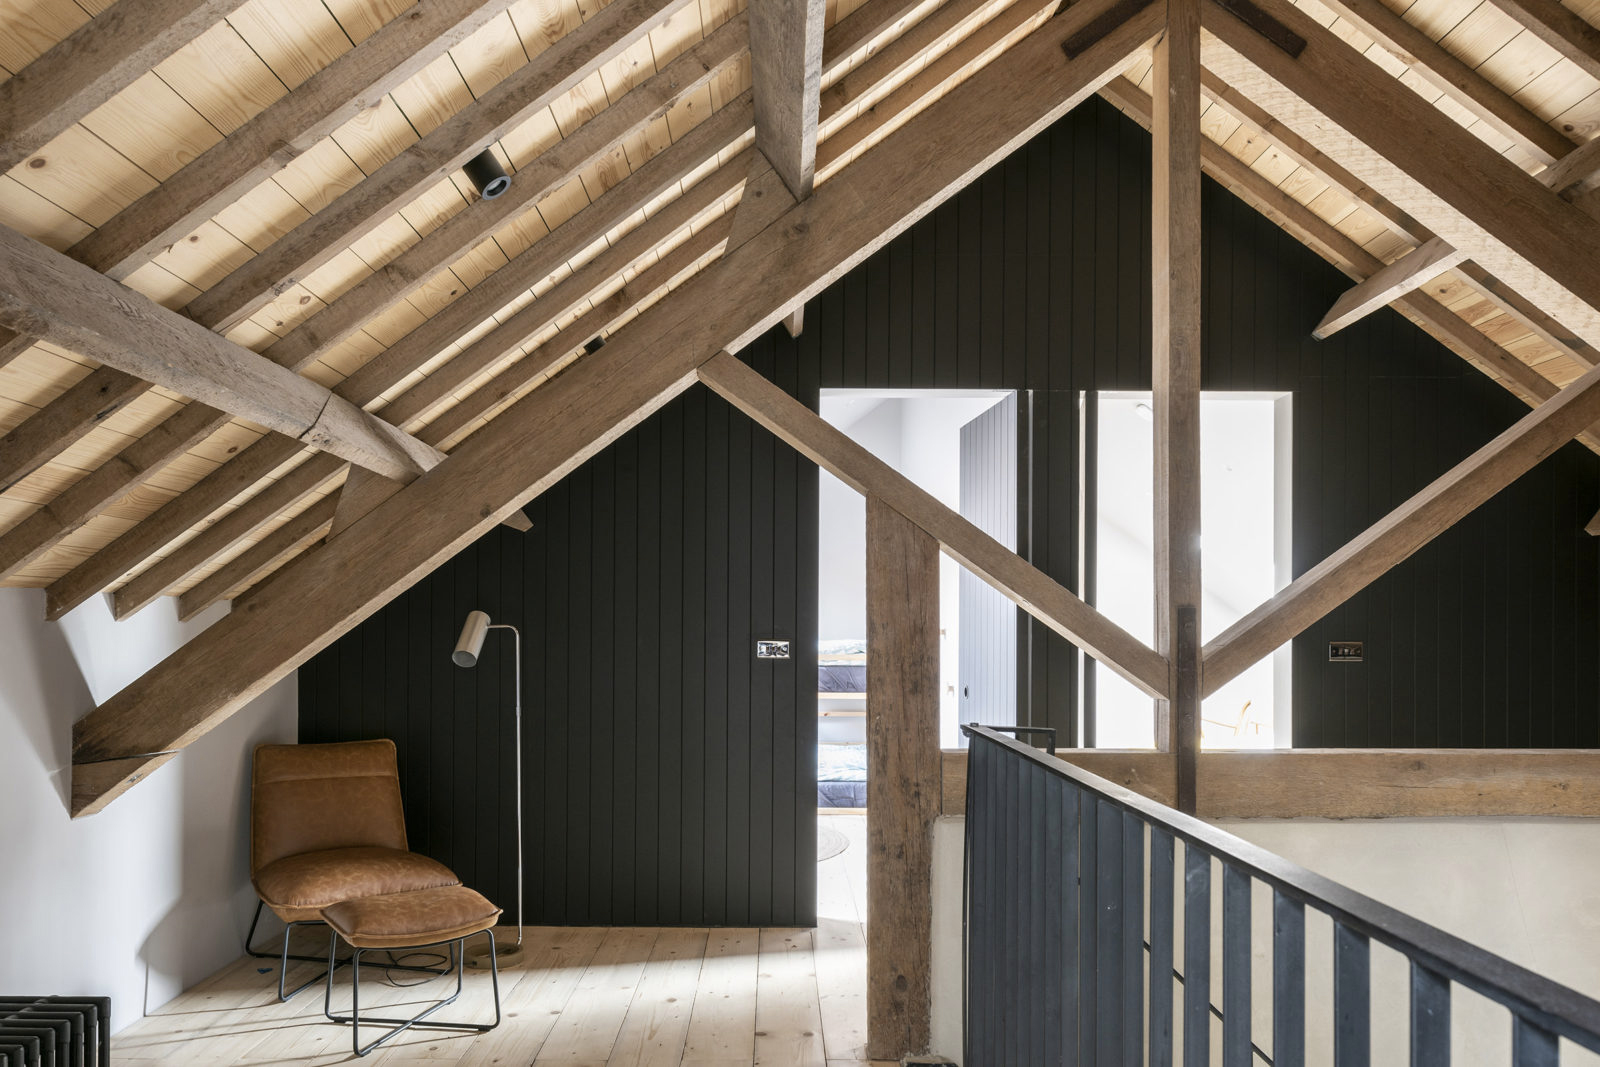 Rustic meets industrial at this £710k barn conversion in Suffolk